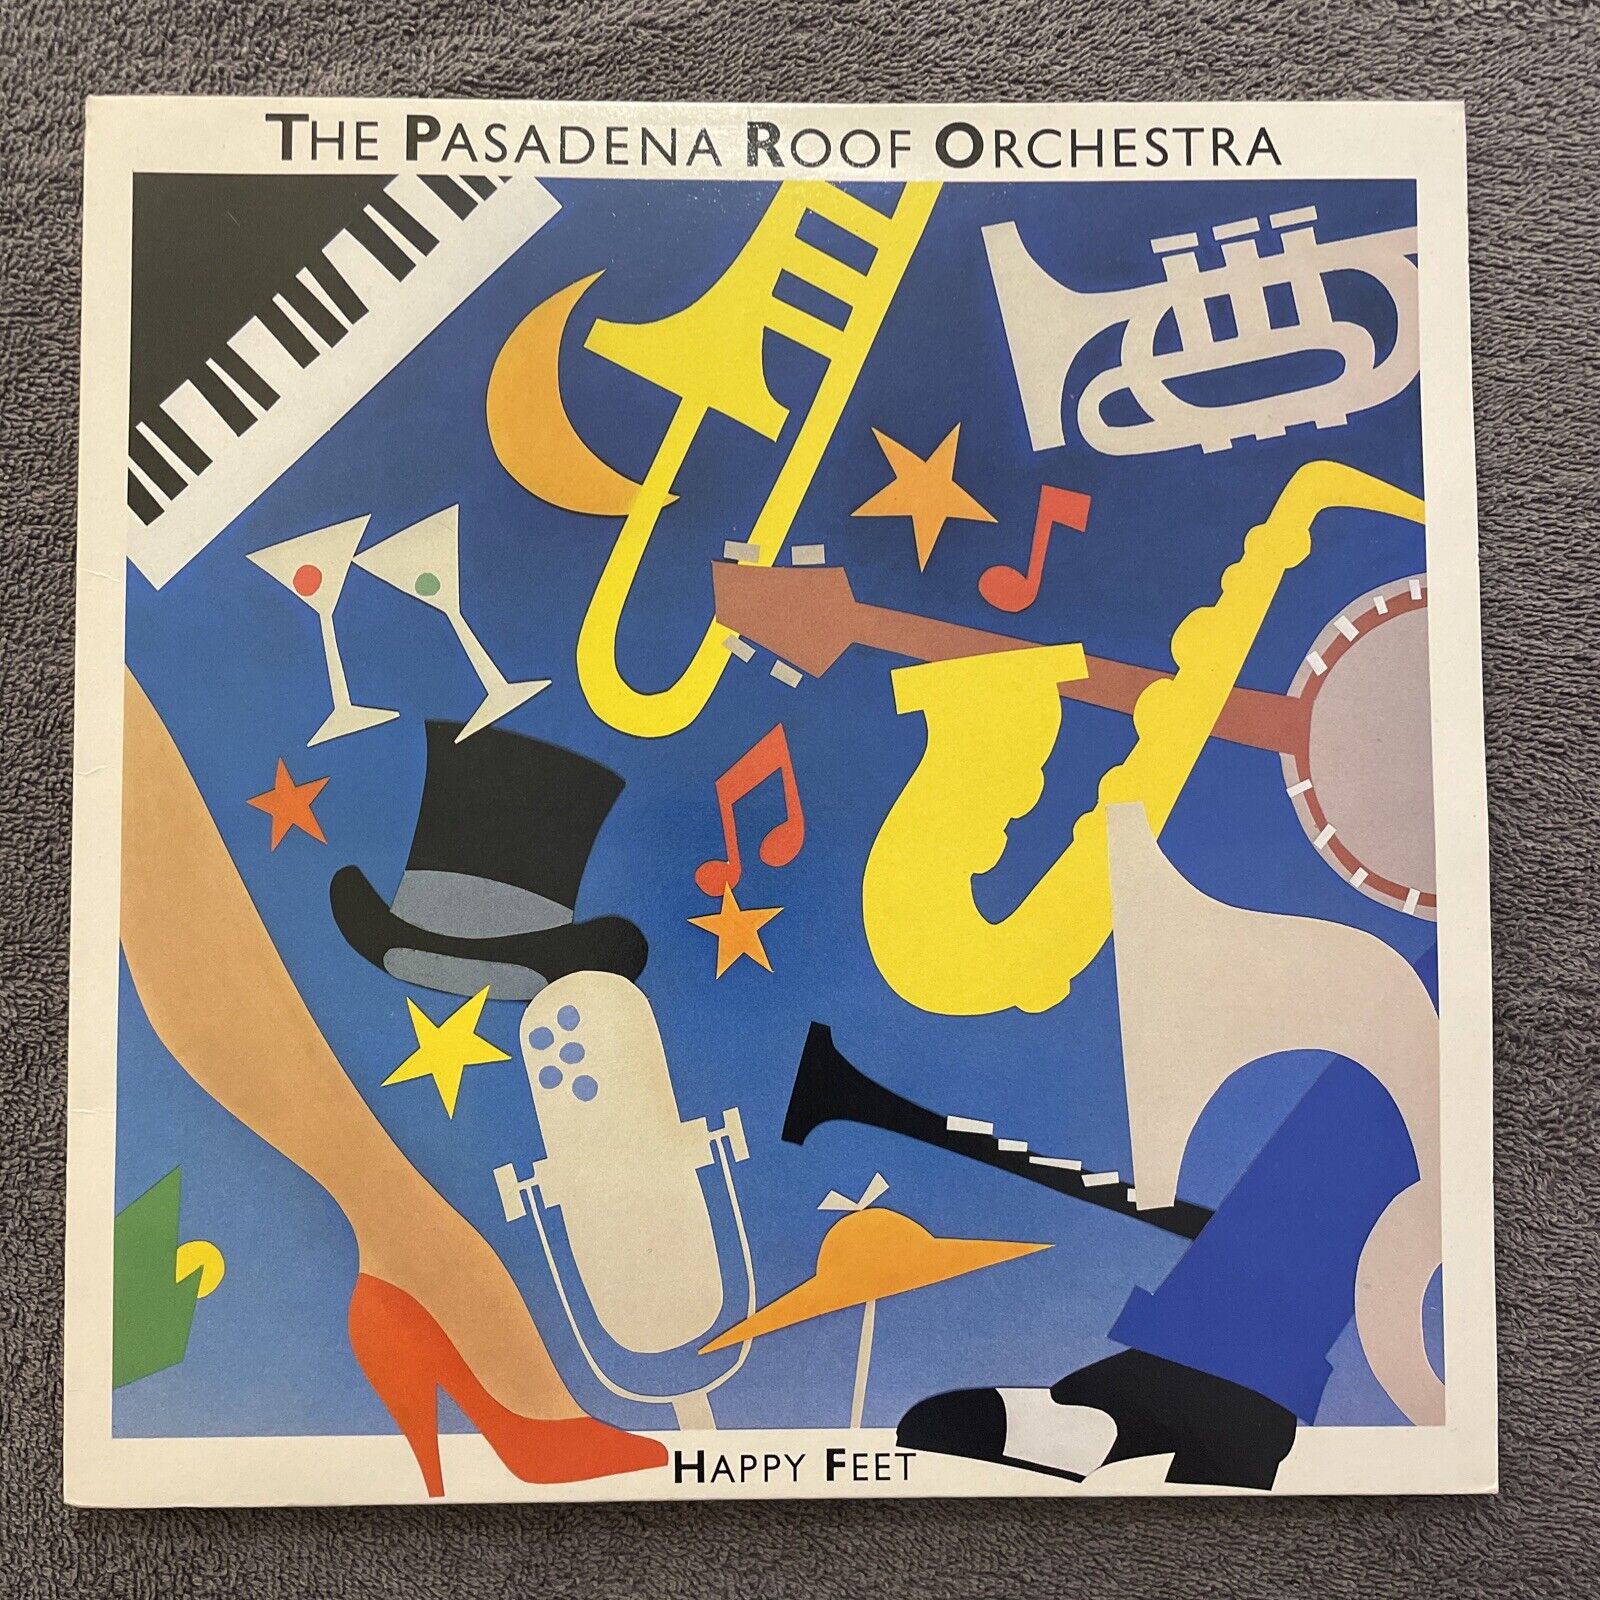 The Pasadena Roof Orchestra - Happy Feet - PROOF1 - UK - 1977 - NM - LP